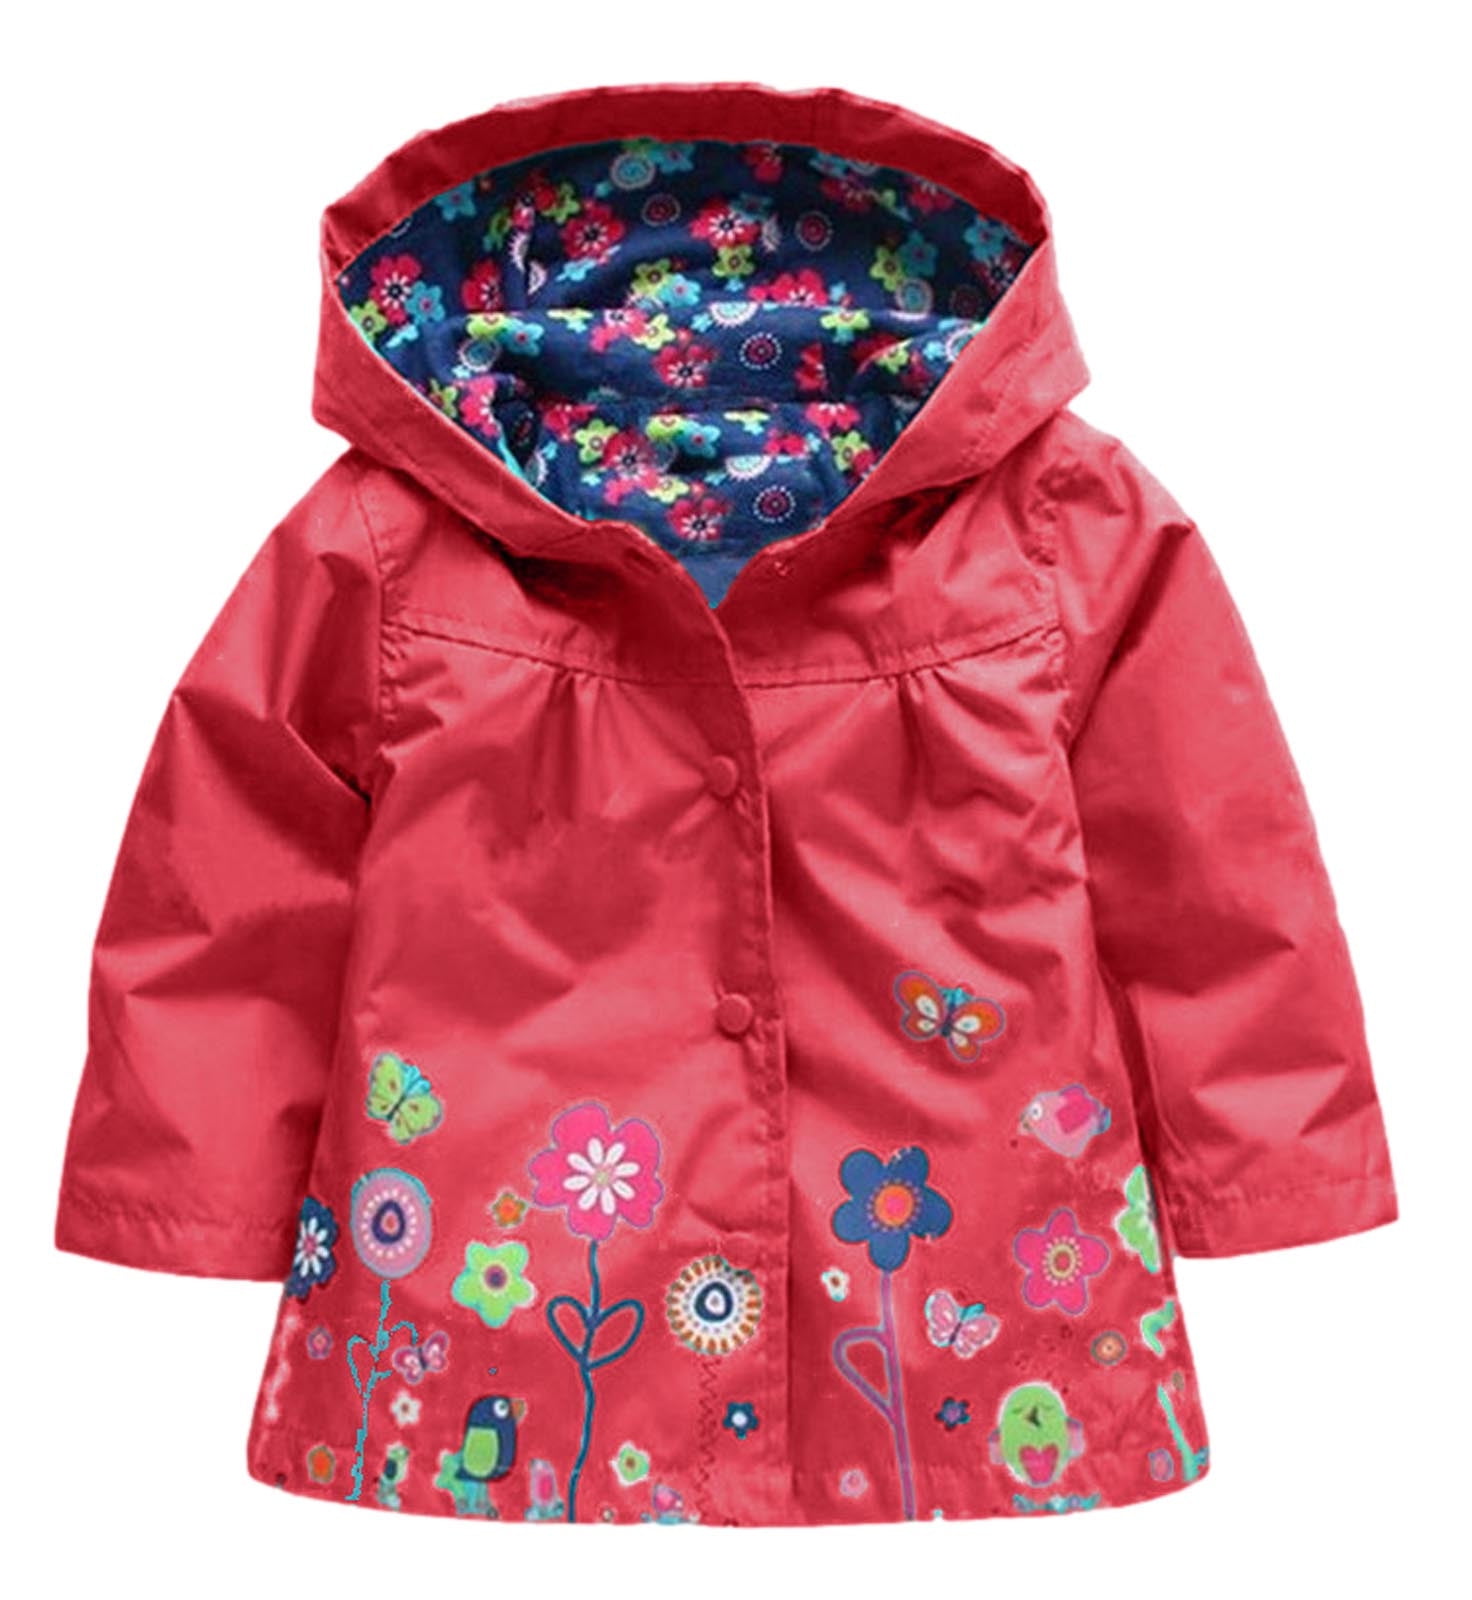 Giftesty Coat for Girls Clearance Girls Clothes Jacket Kids Raincoat ...